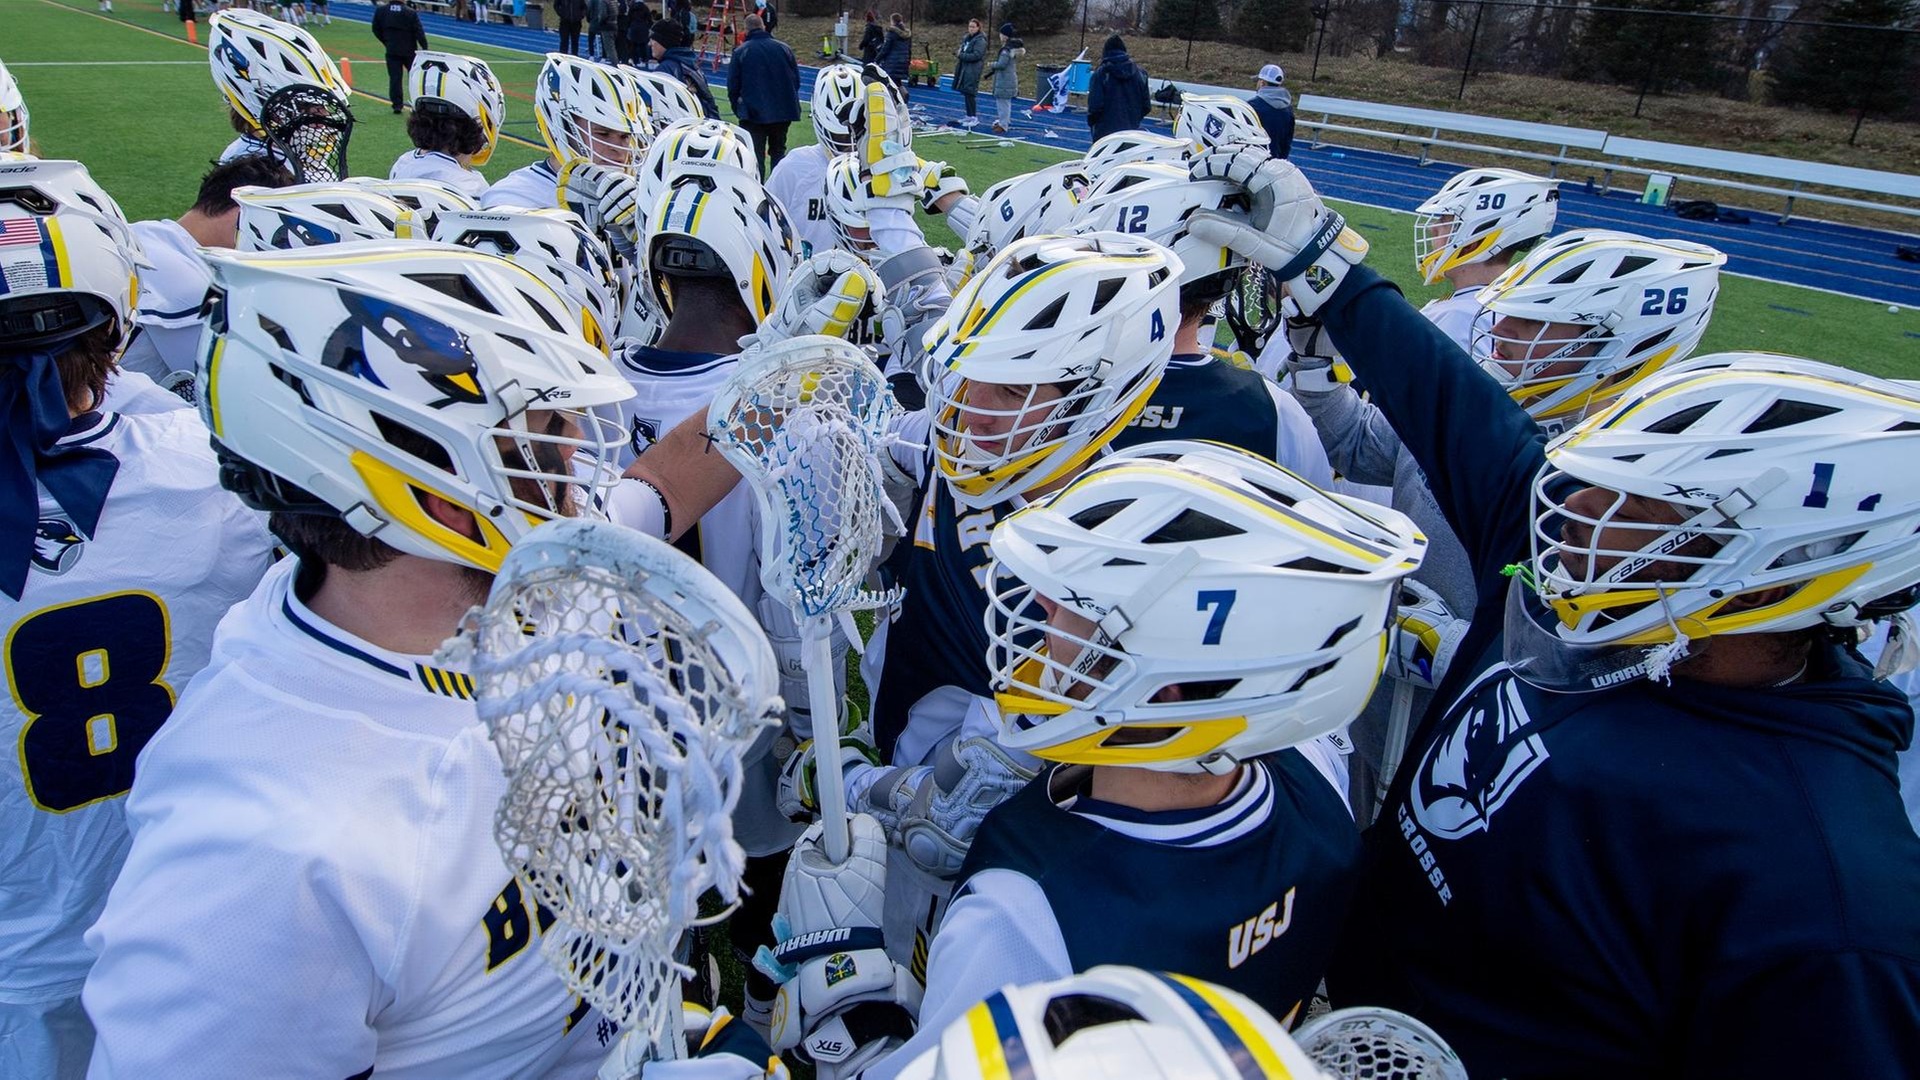 Men's Lacrosse Falls at Home, 10-7, to Hartford Saturday Afternoon